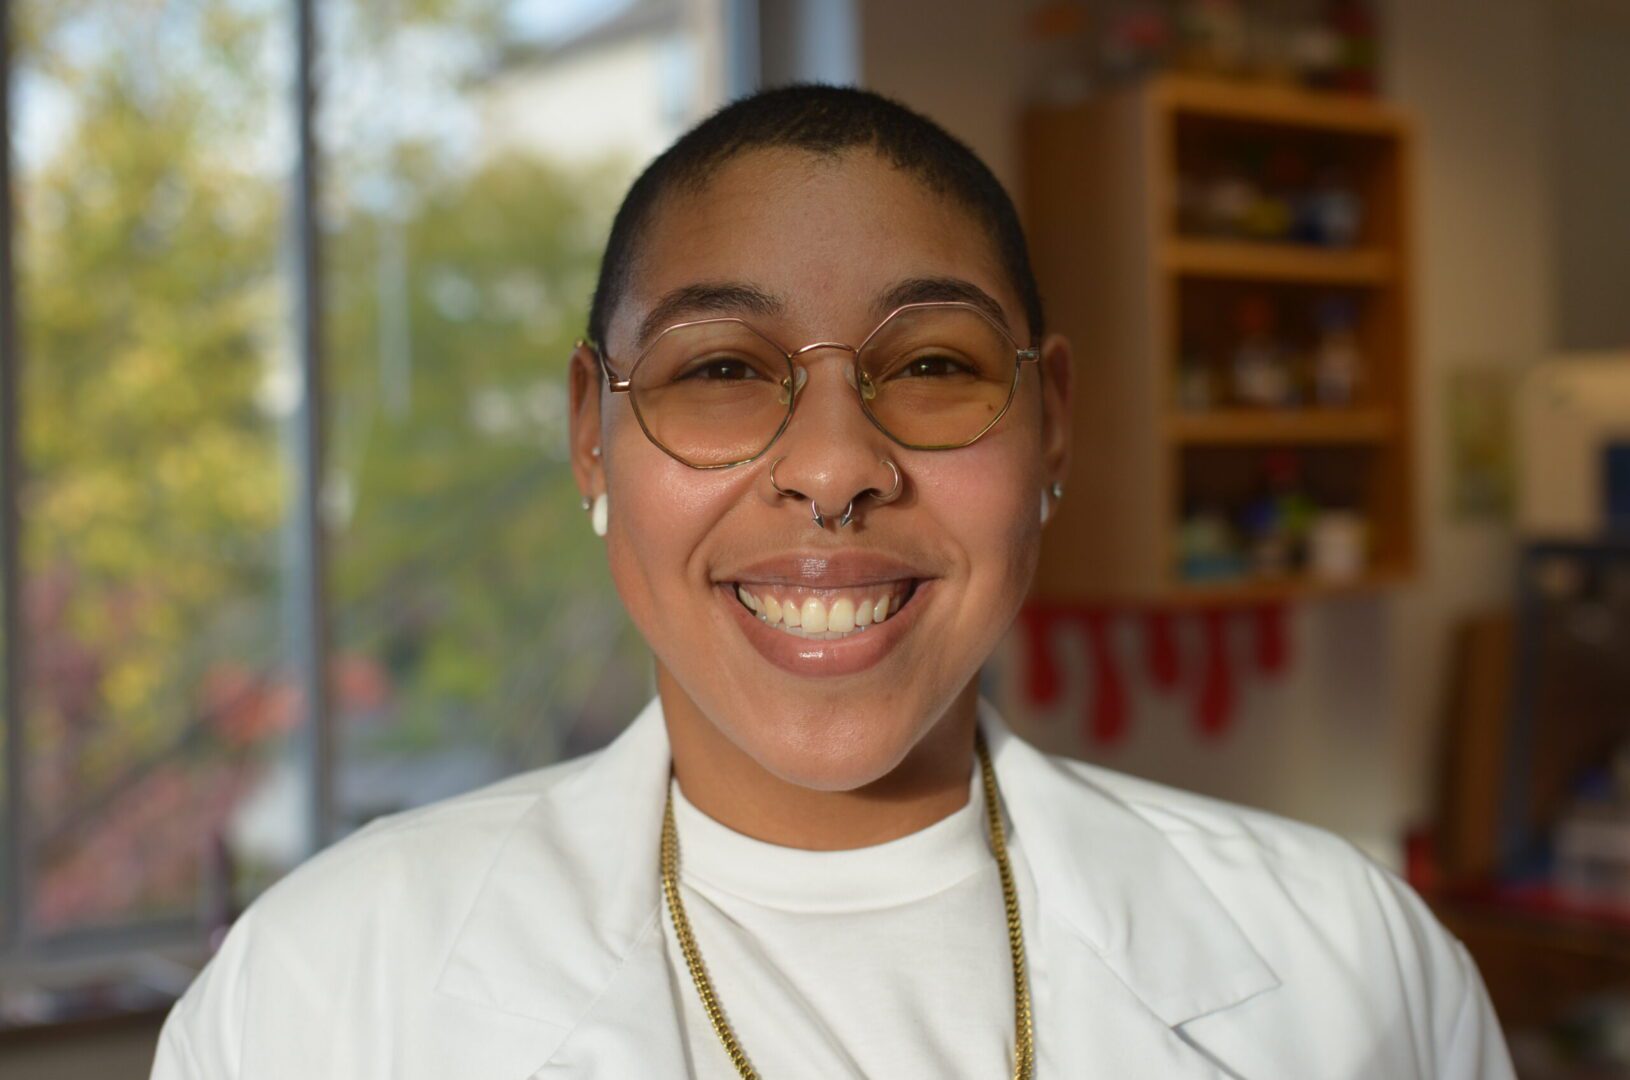 A woman in white shirt and glasses smiling.